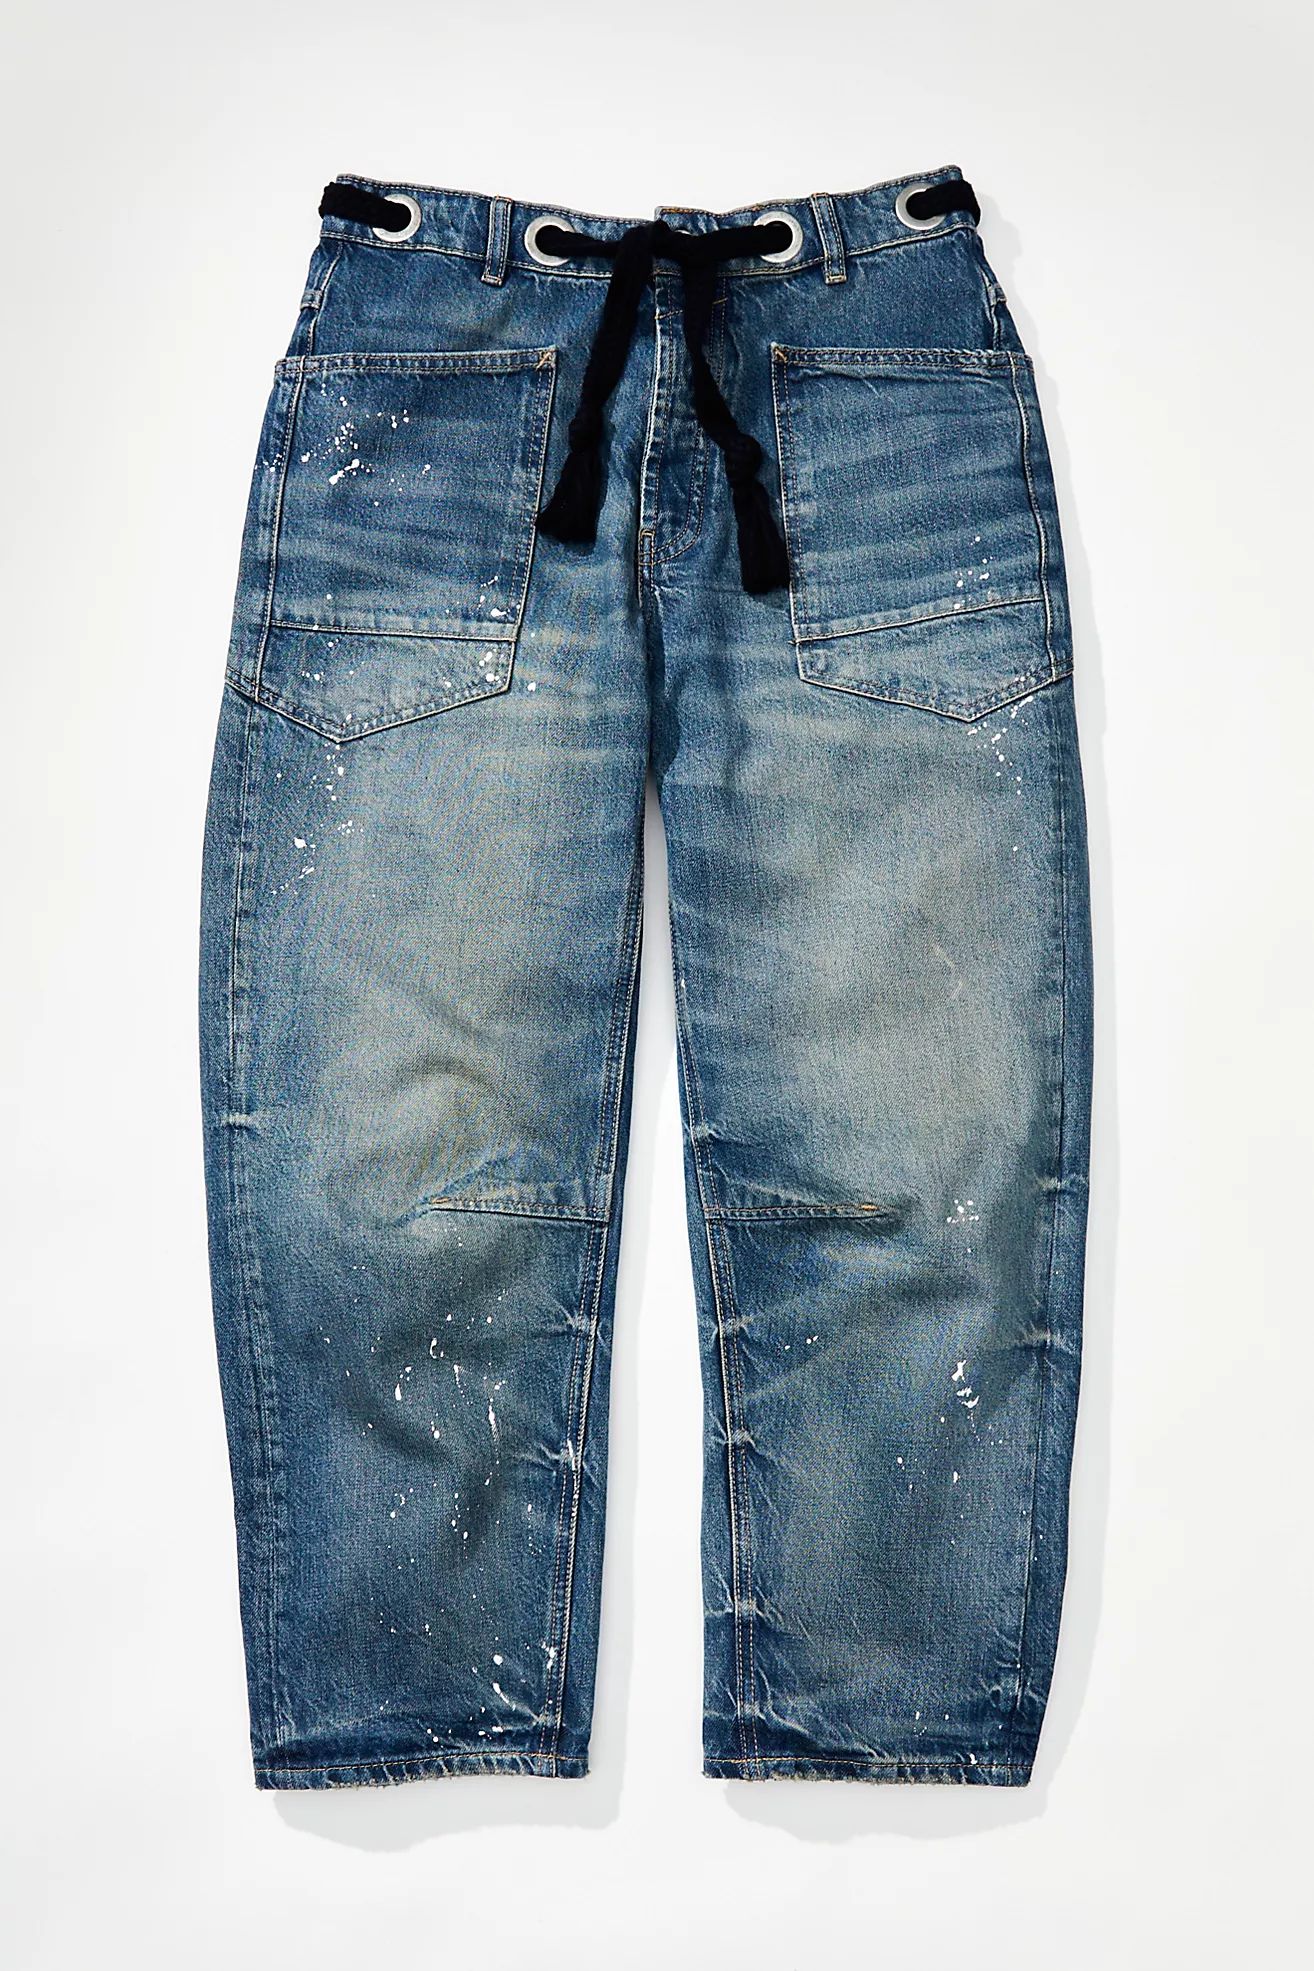 We The Free Moxie Pull-On Barrel Jeans | Free People (UK)